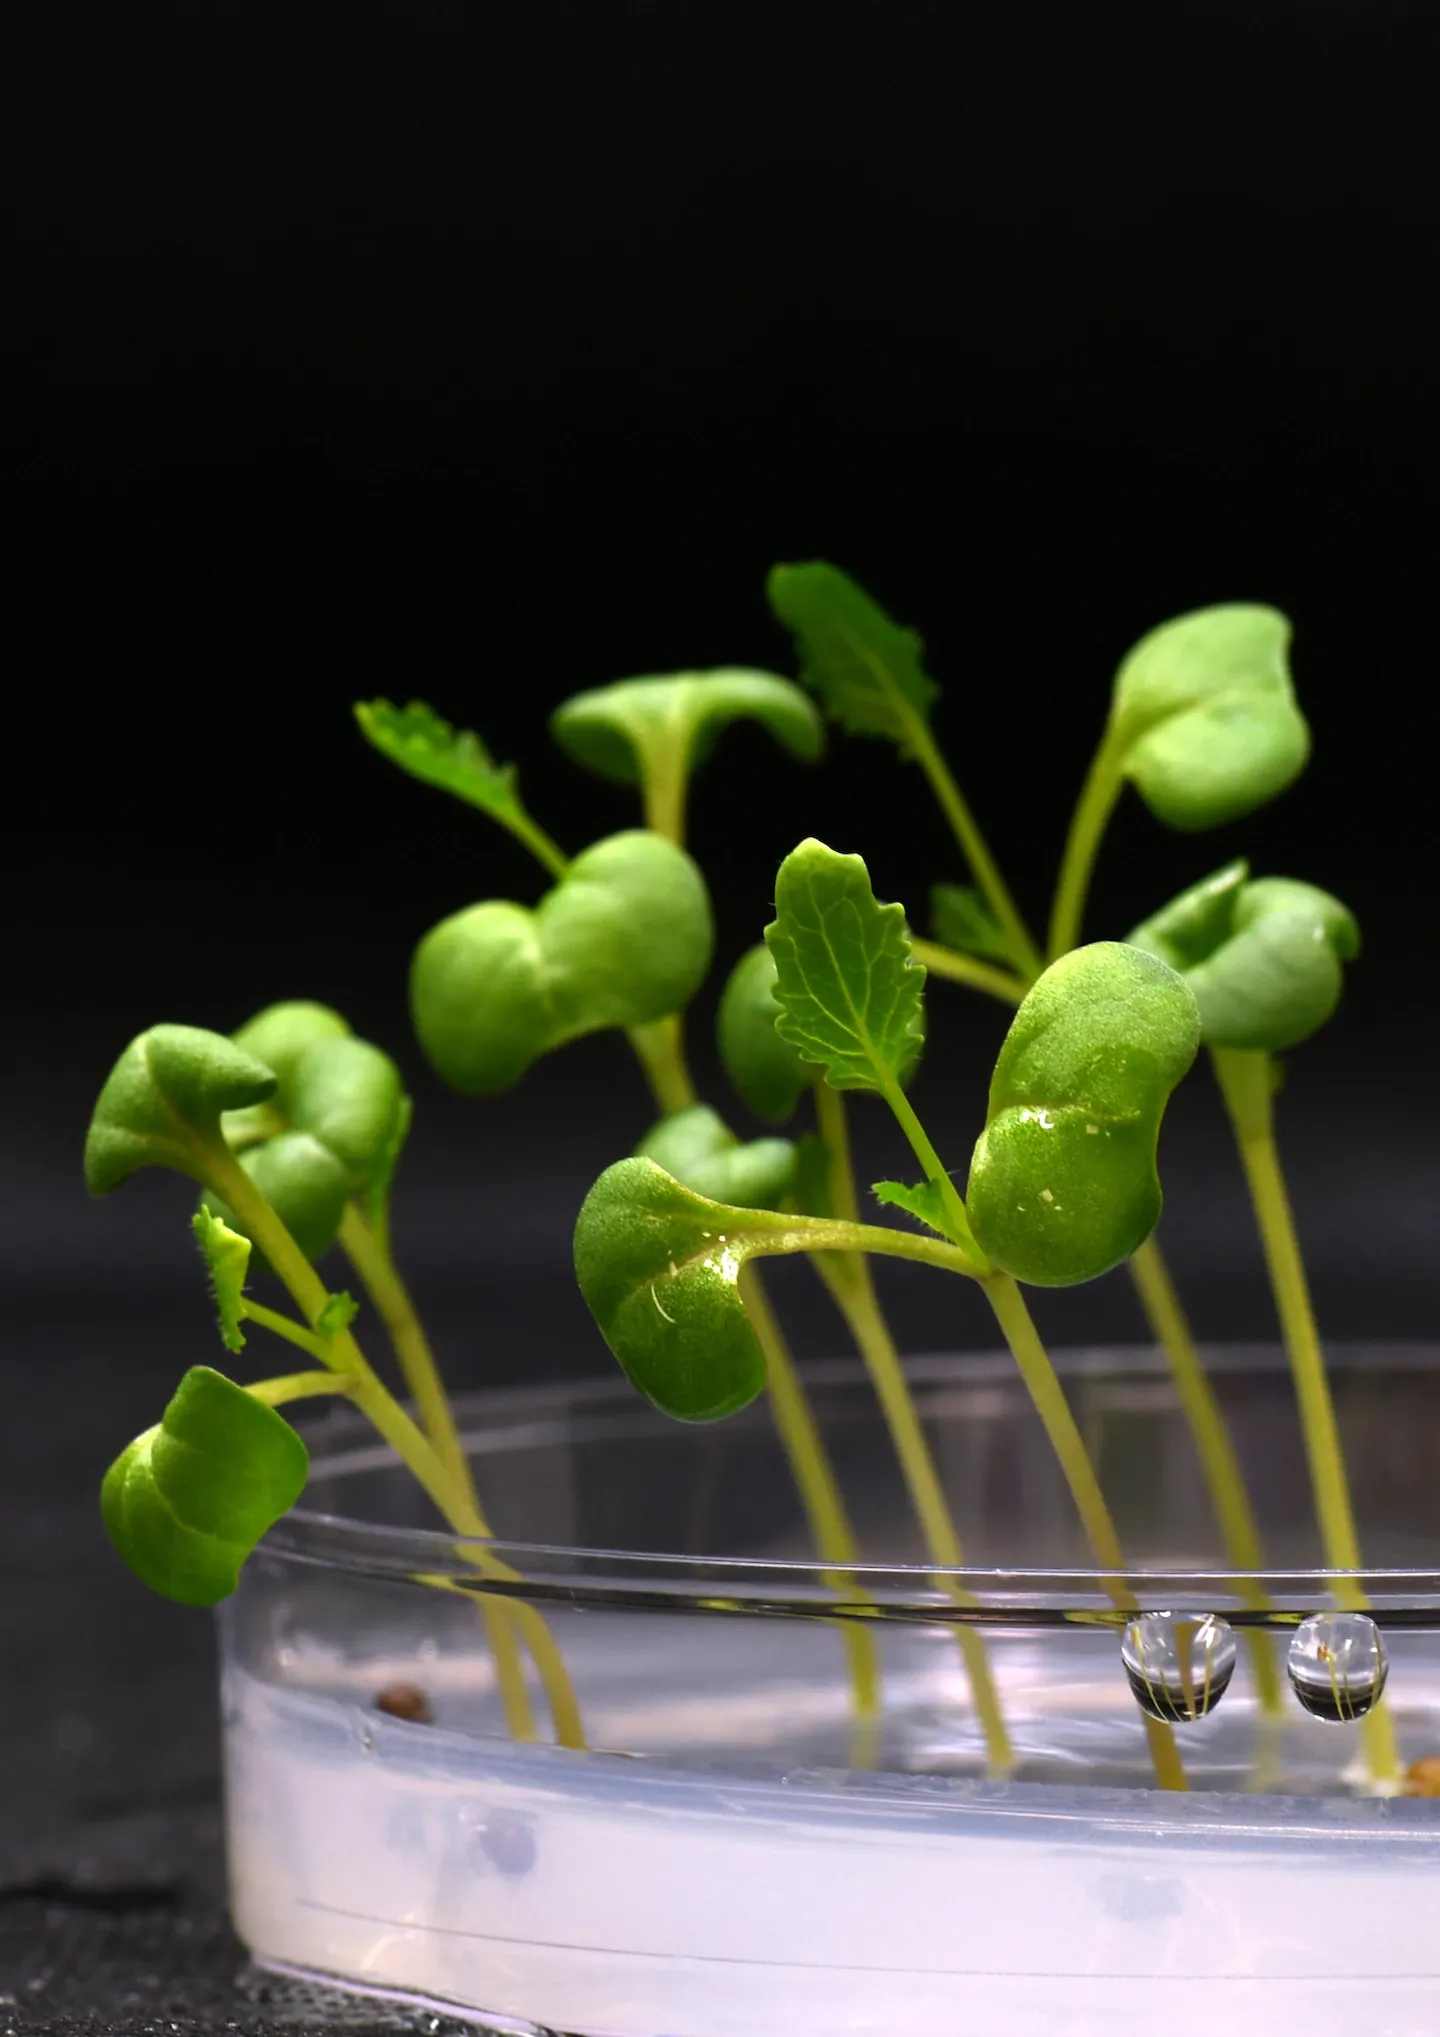 Can food crops grow in the dark? Scientists are working out how.